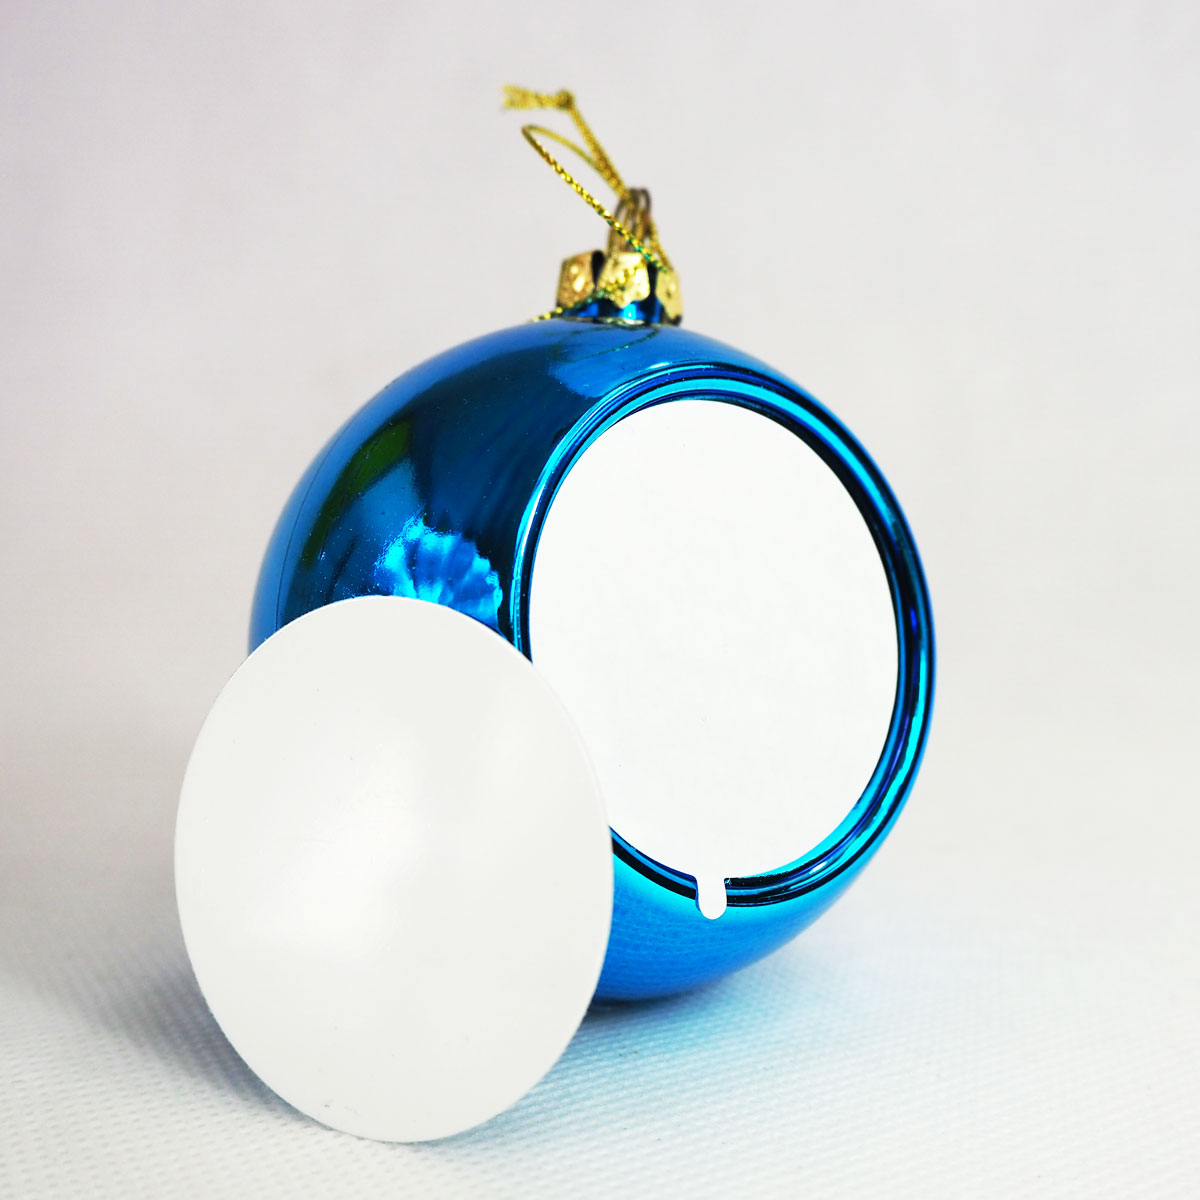 Christmas bauble for sublimation